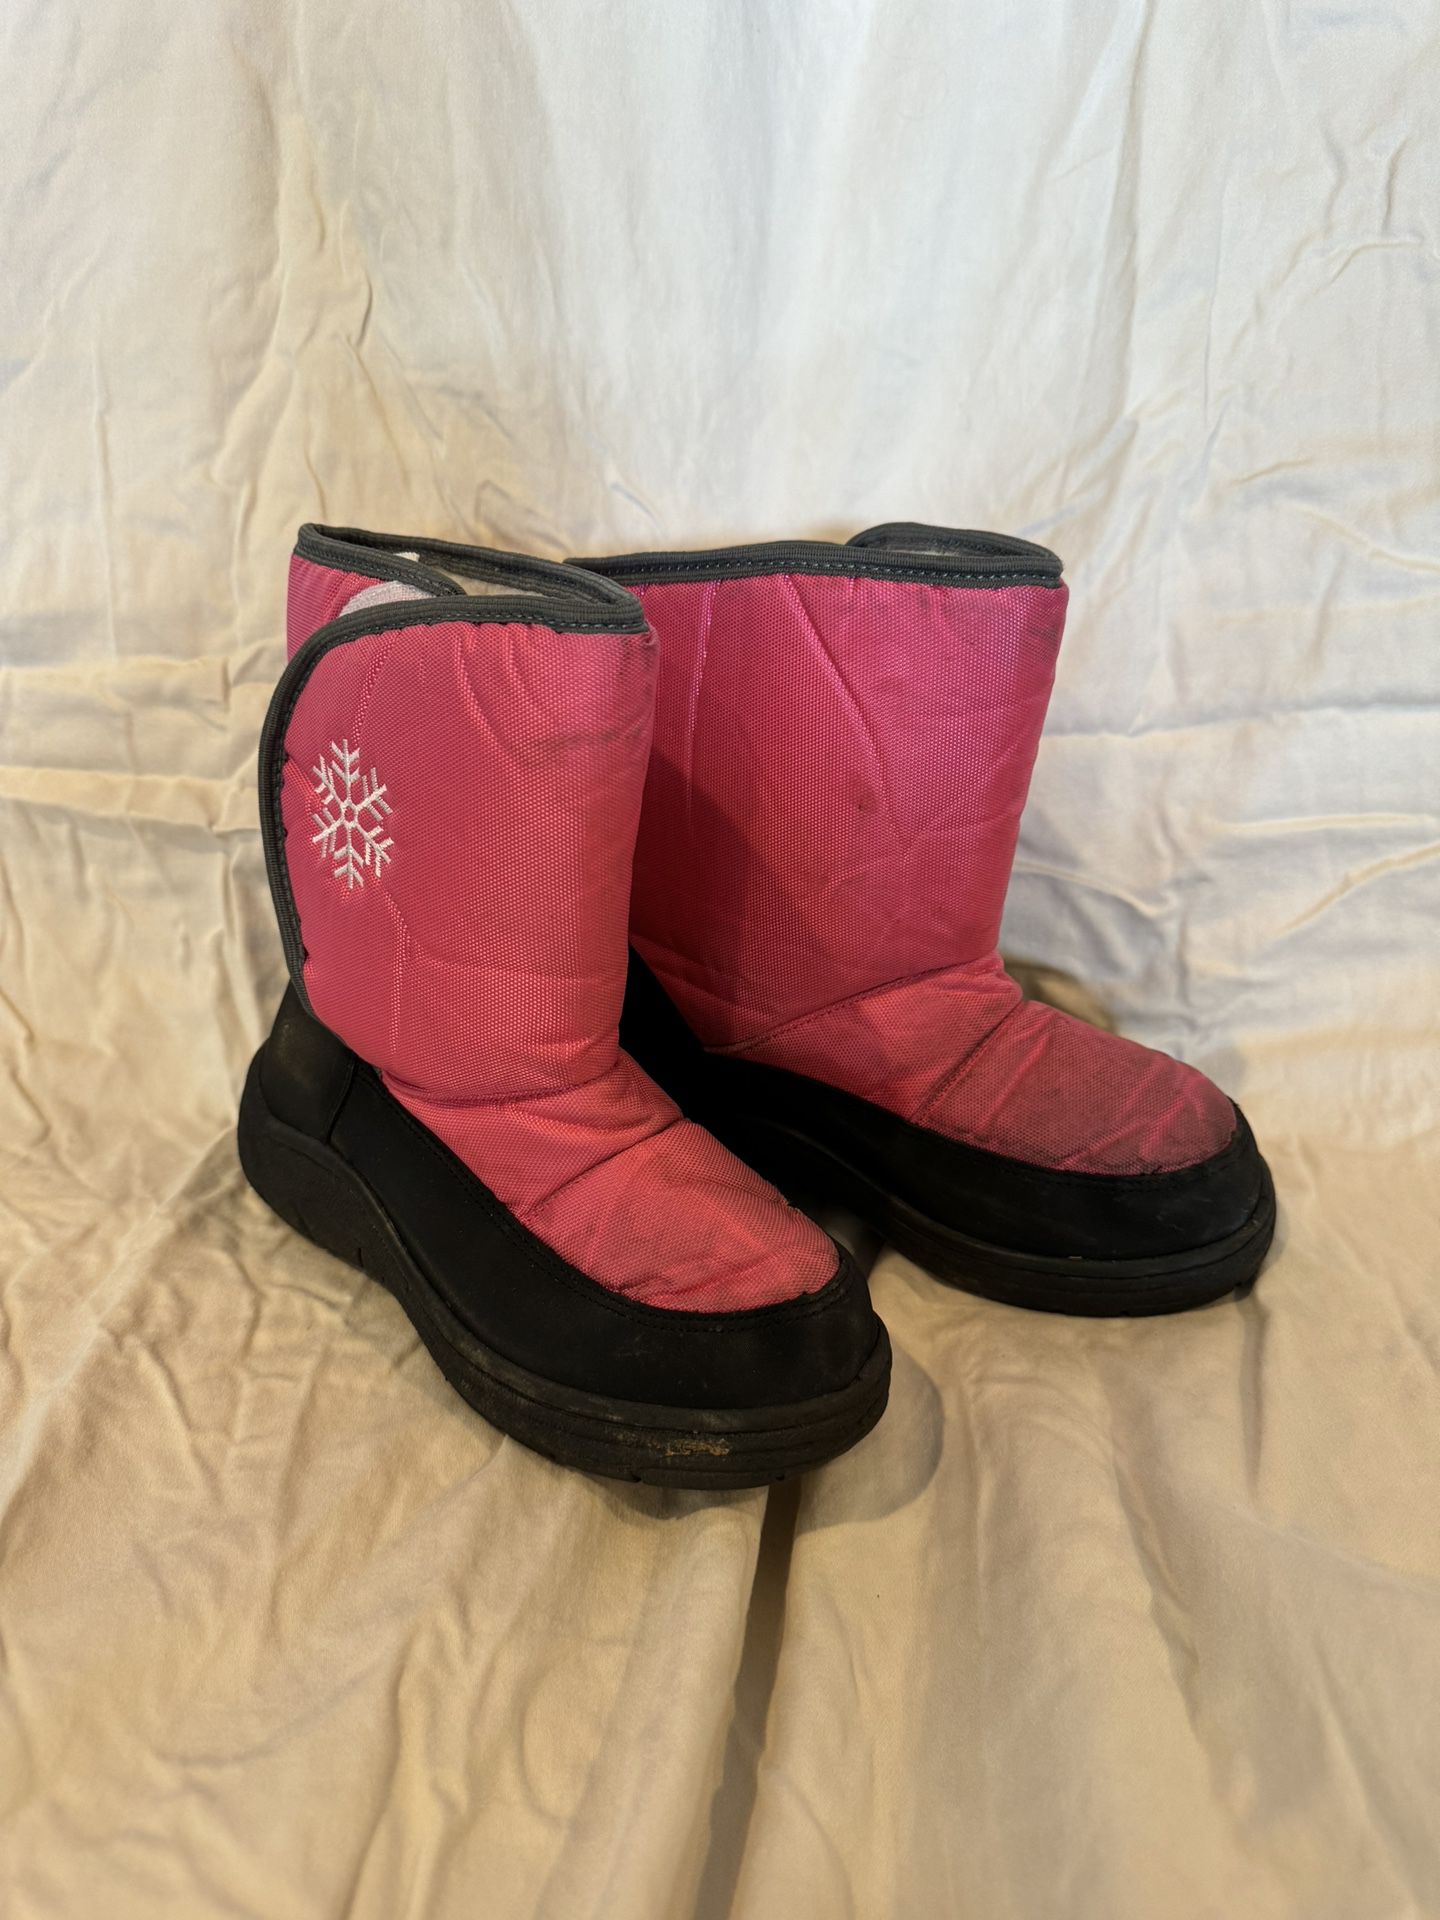 Girls Pink Snow Boots. Size 2 Youth. $15